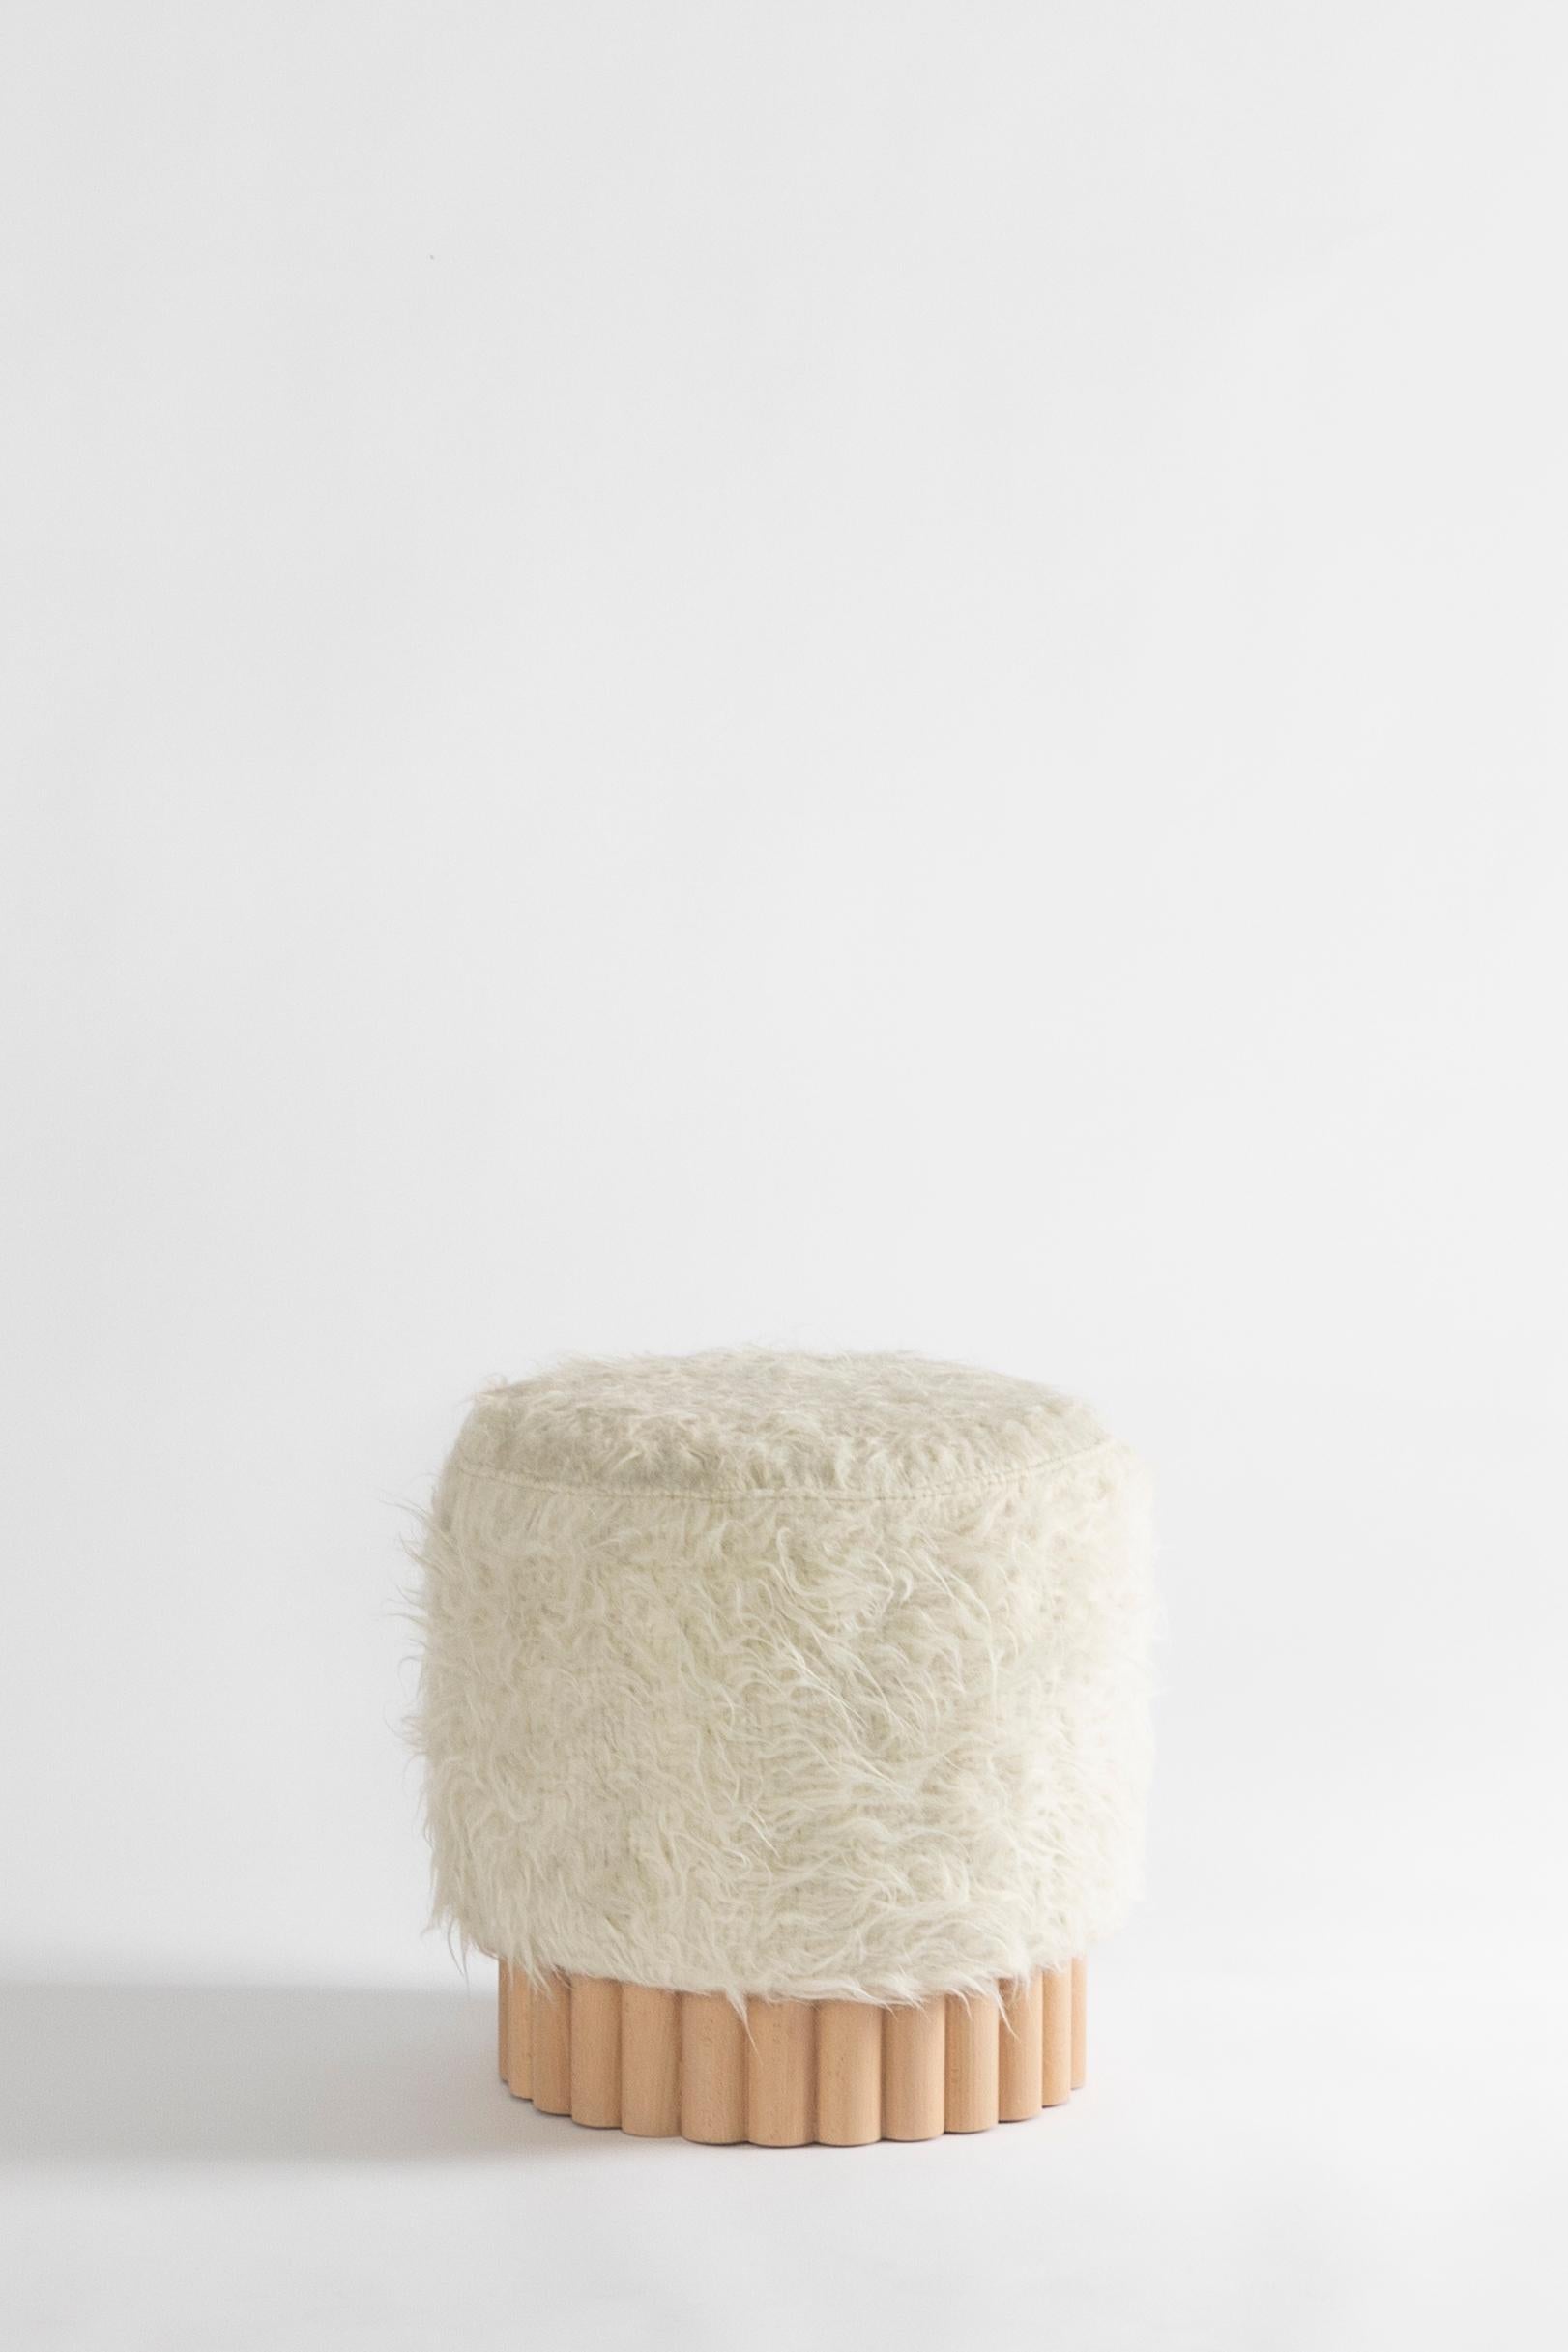 Mexican LOTO Pouf in Long Pile Shag Wool by Peca For Sale